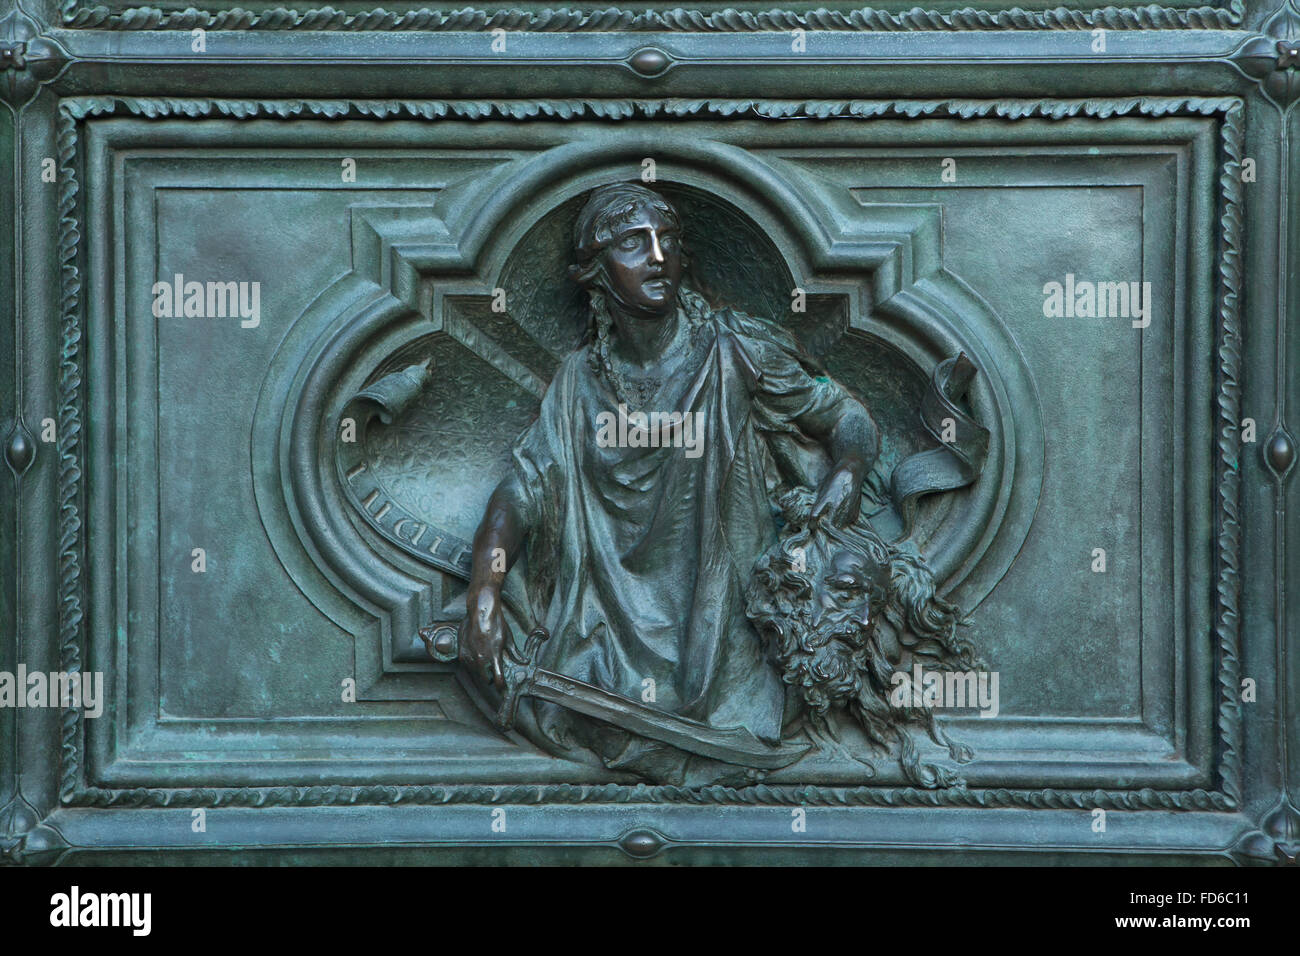 Judith with the Head of Holophernes. Detail of the main bronze door of the Milan Cathedral (Duomo di Milano) in Milan, Italy. The bronze door was designed by Italian sculptor Ludovico Pogliaghi in 1894-1908. Stock Photo